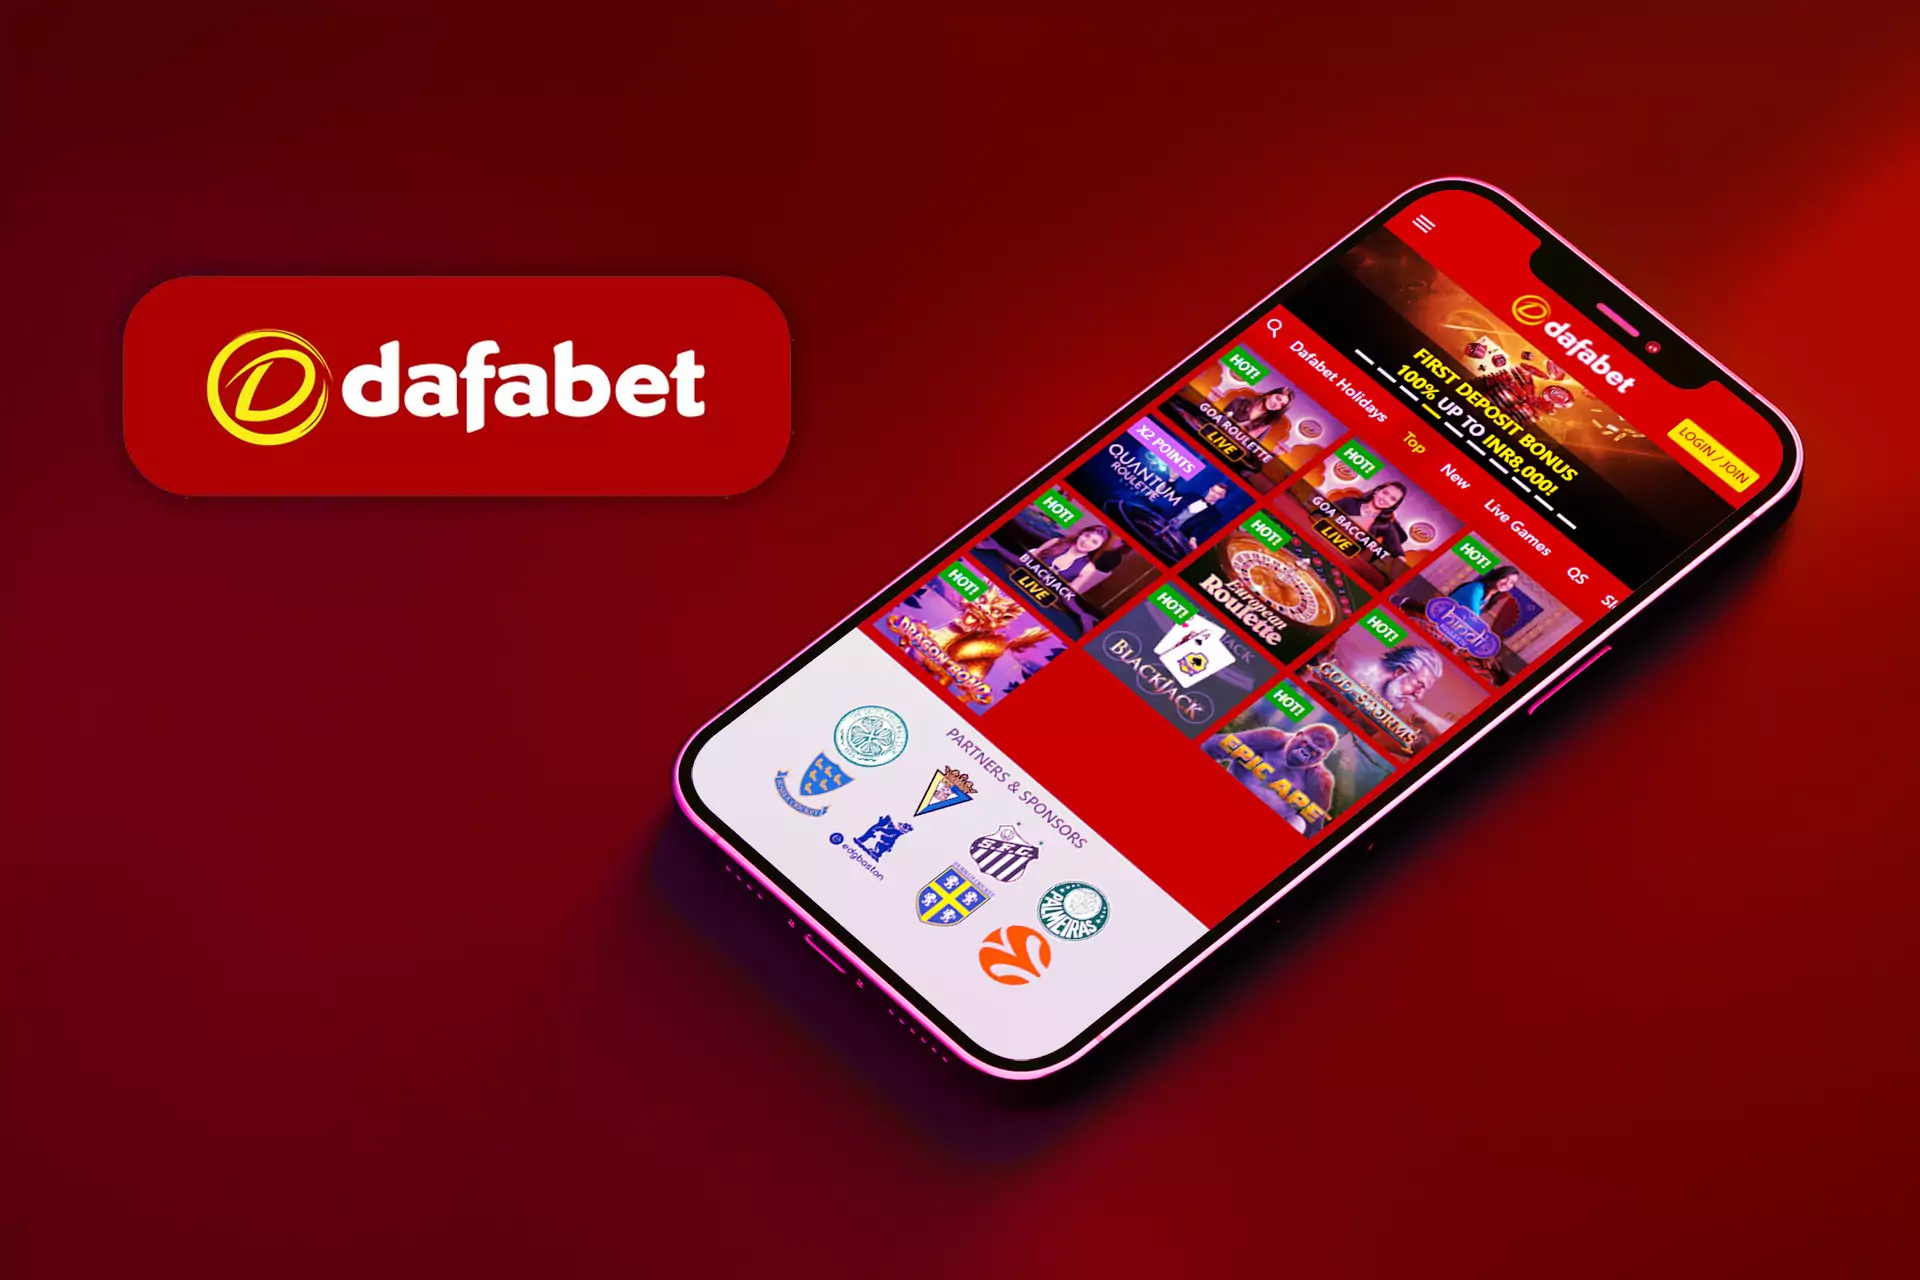 The Dafabet Casino works under the trustworthy Curacao license since 2004.